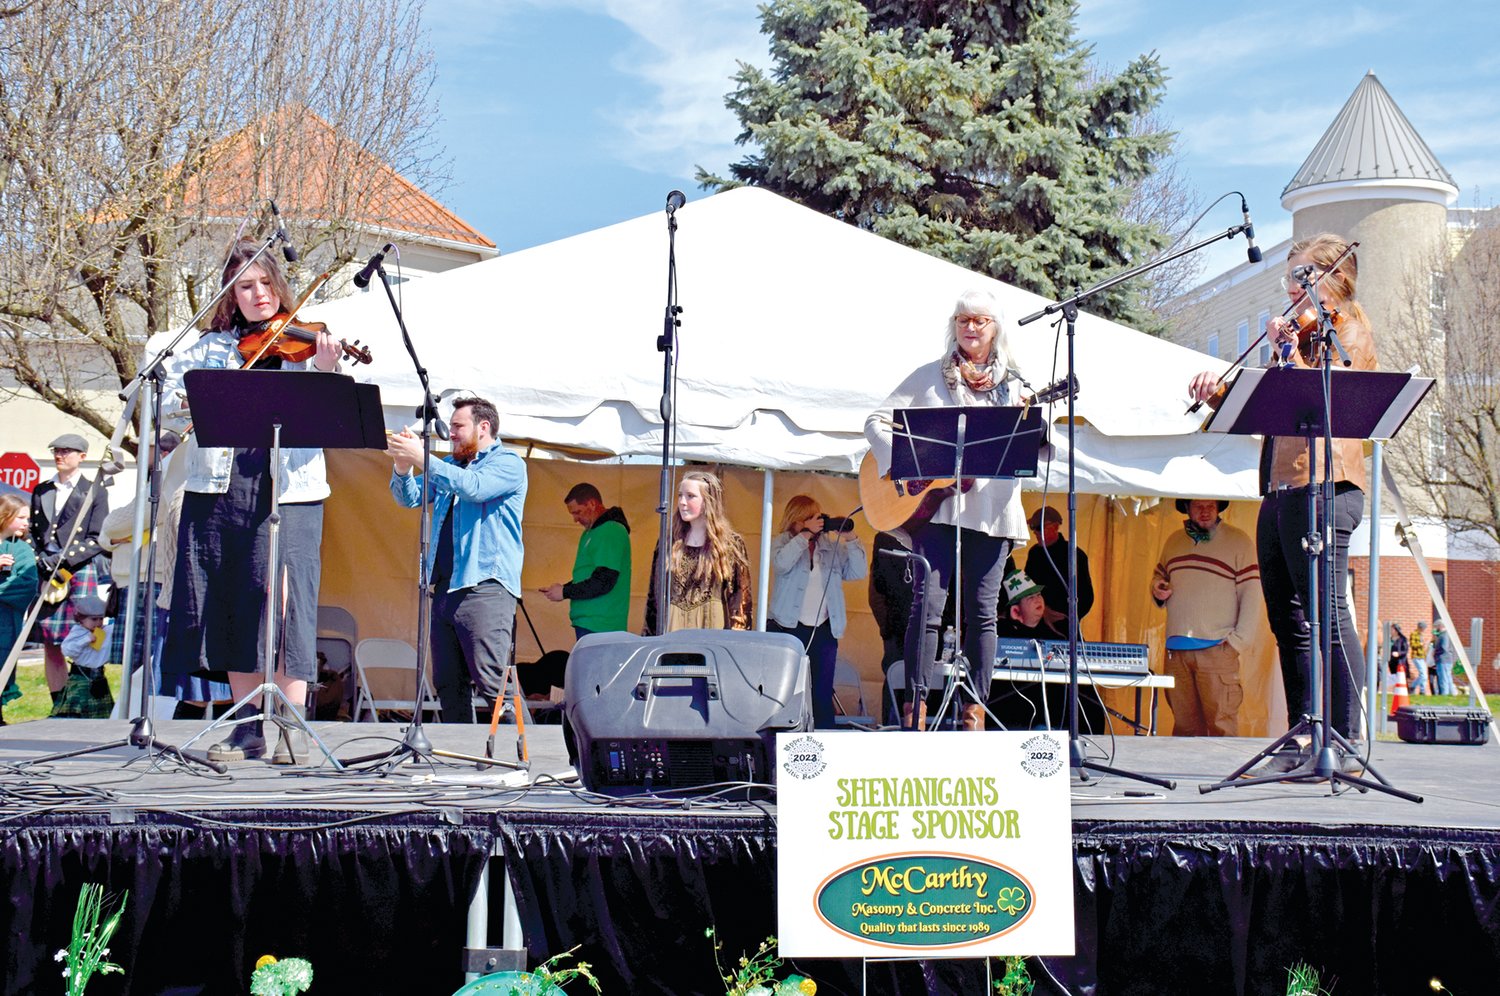 Wiren Violins, one of the bands that played on Shenanigans stage.